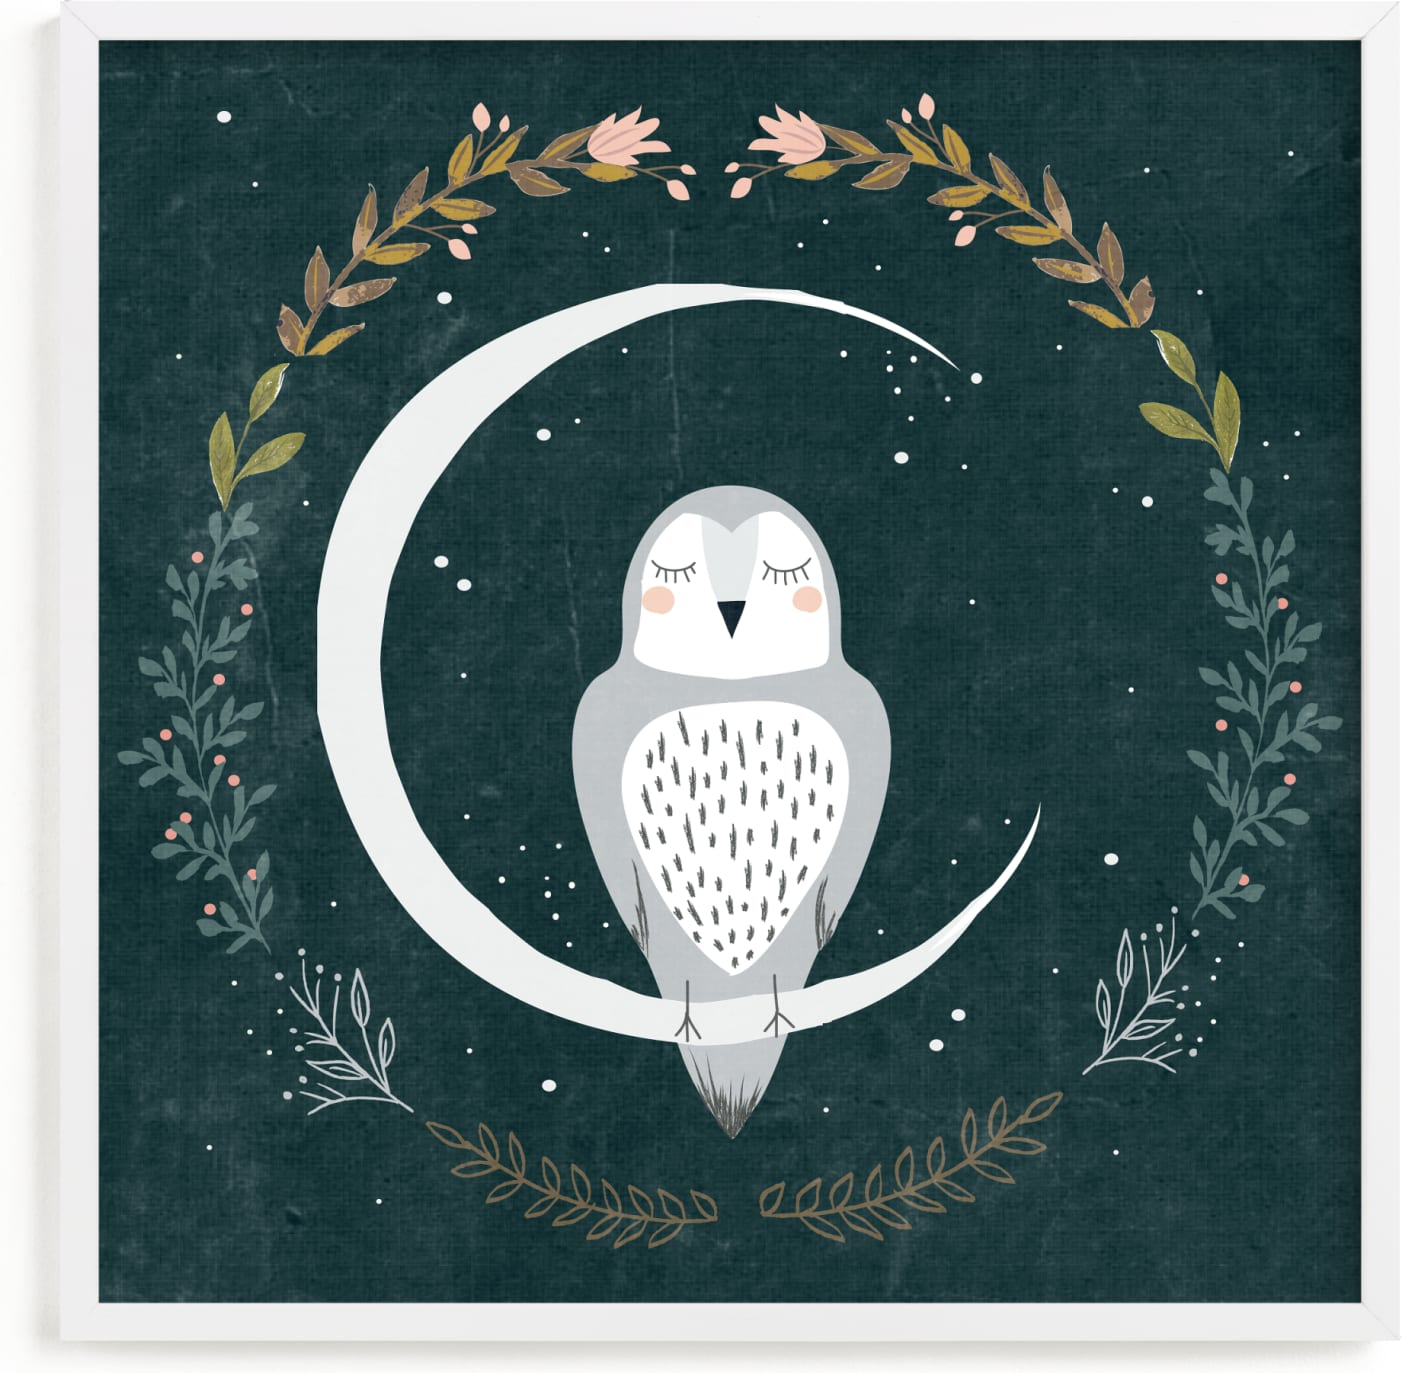 This is a colorful art by Hannah Williams called Moon and Owl.